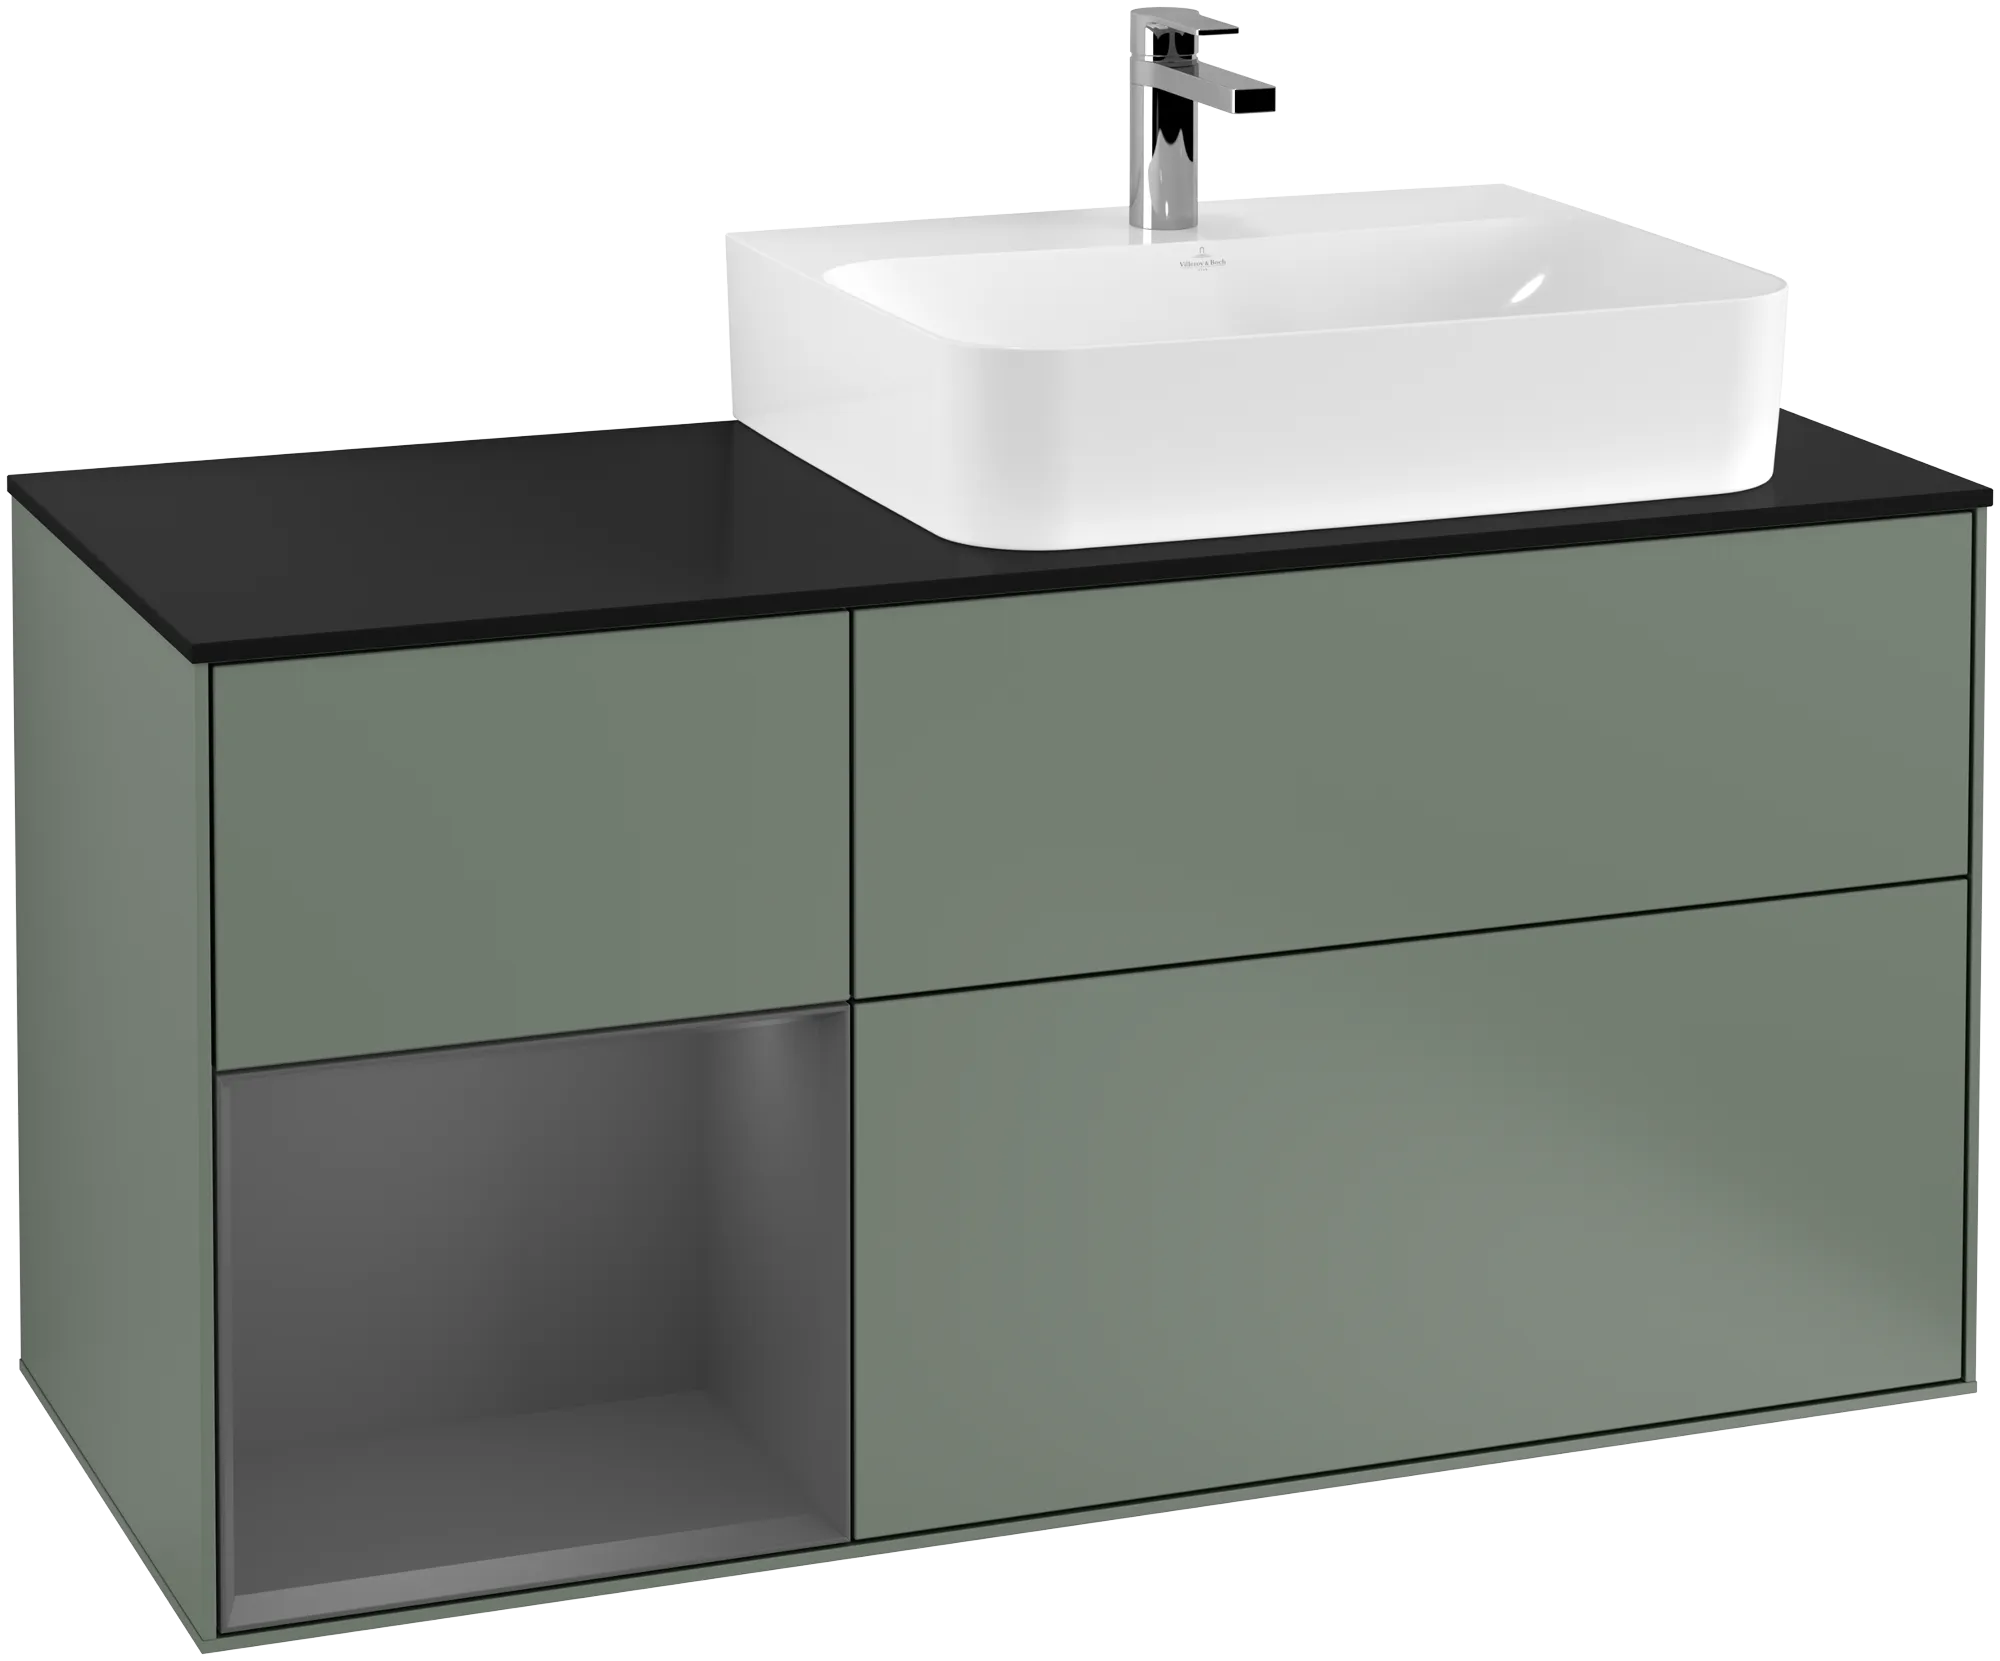 Picture of VILLEROY BOCH Finion Vanity unit, with lighting, 3 pull-out compartments, 1200 x 603 x 501 mm, Olive Matt Lacquer / Anthracite Matt Lacquer / Glass Black Matt #G142GKGM